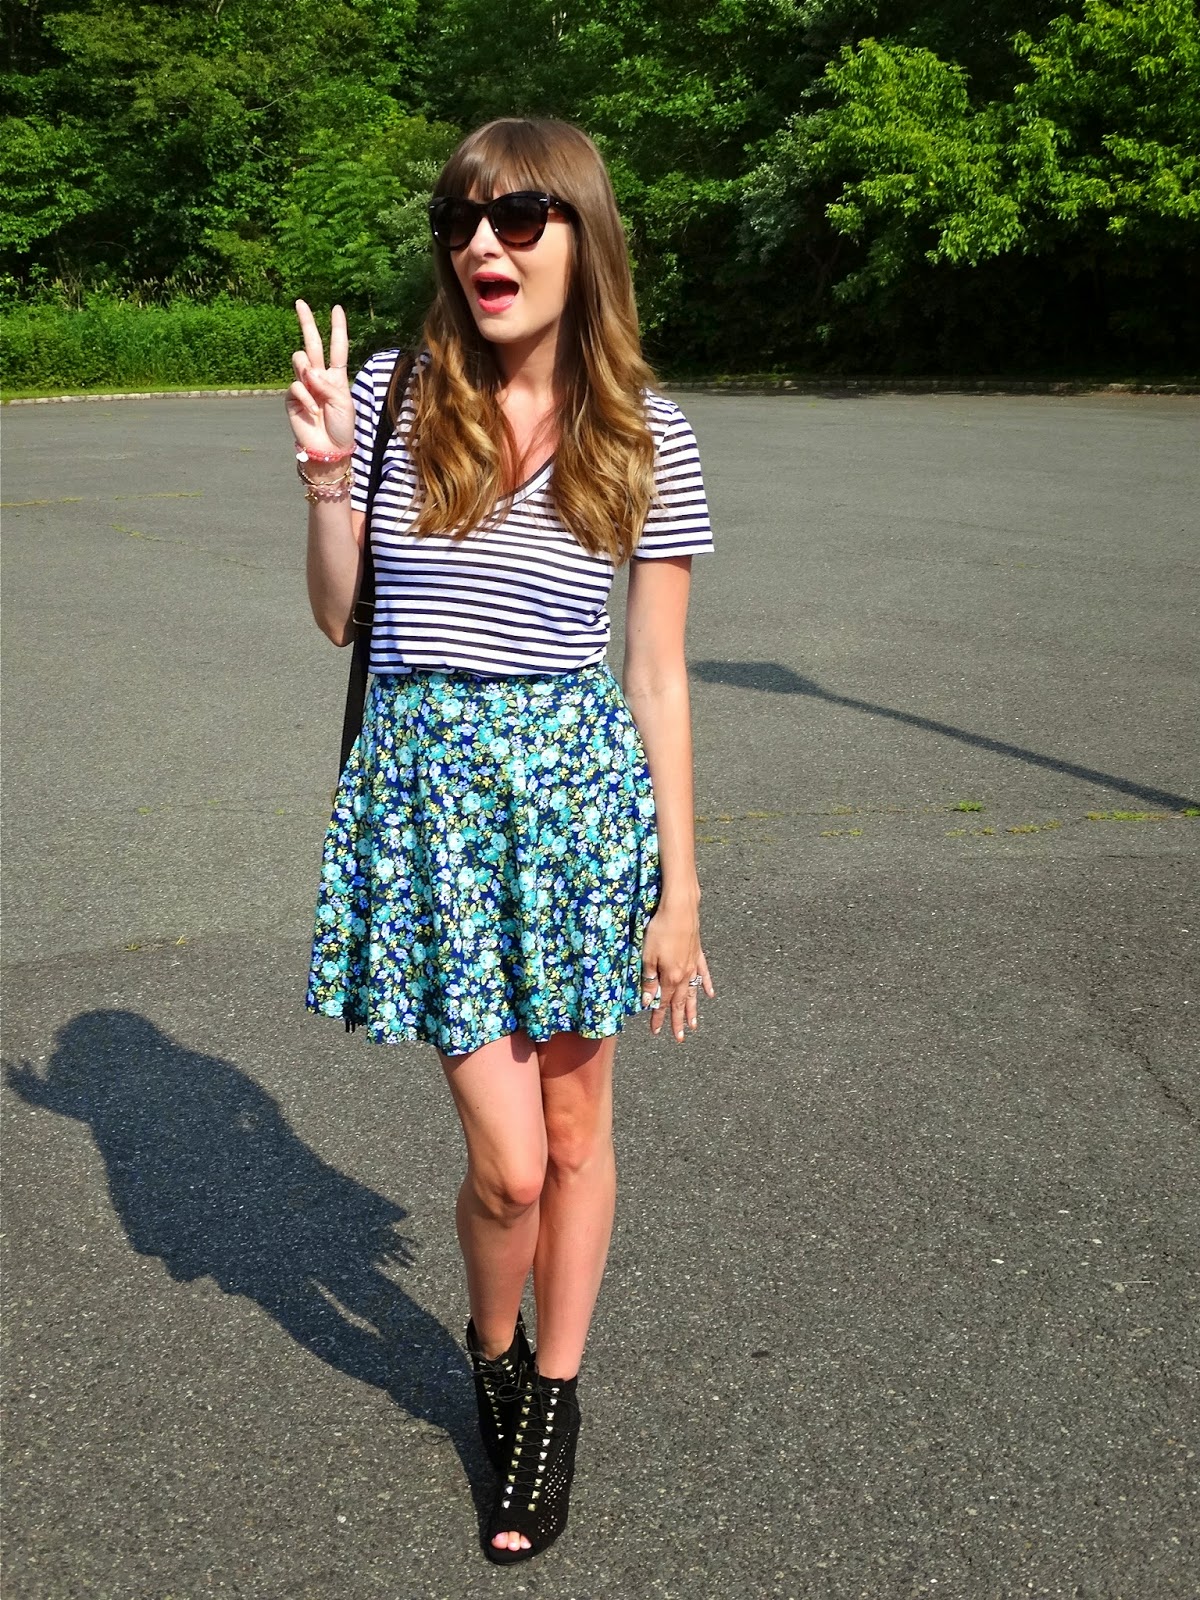 How to wear Stripes and Floral Prints | House Of Jeffers | www.houseofjeffers.com